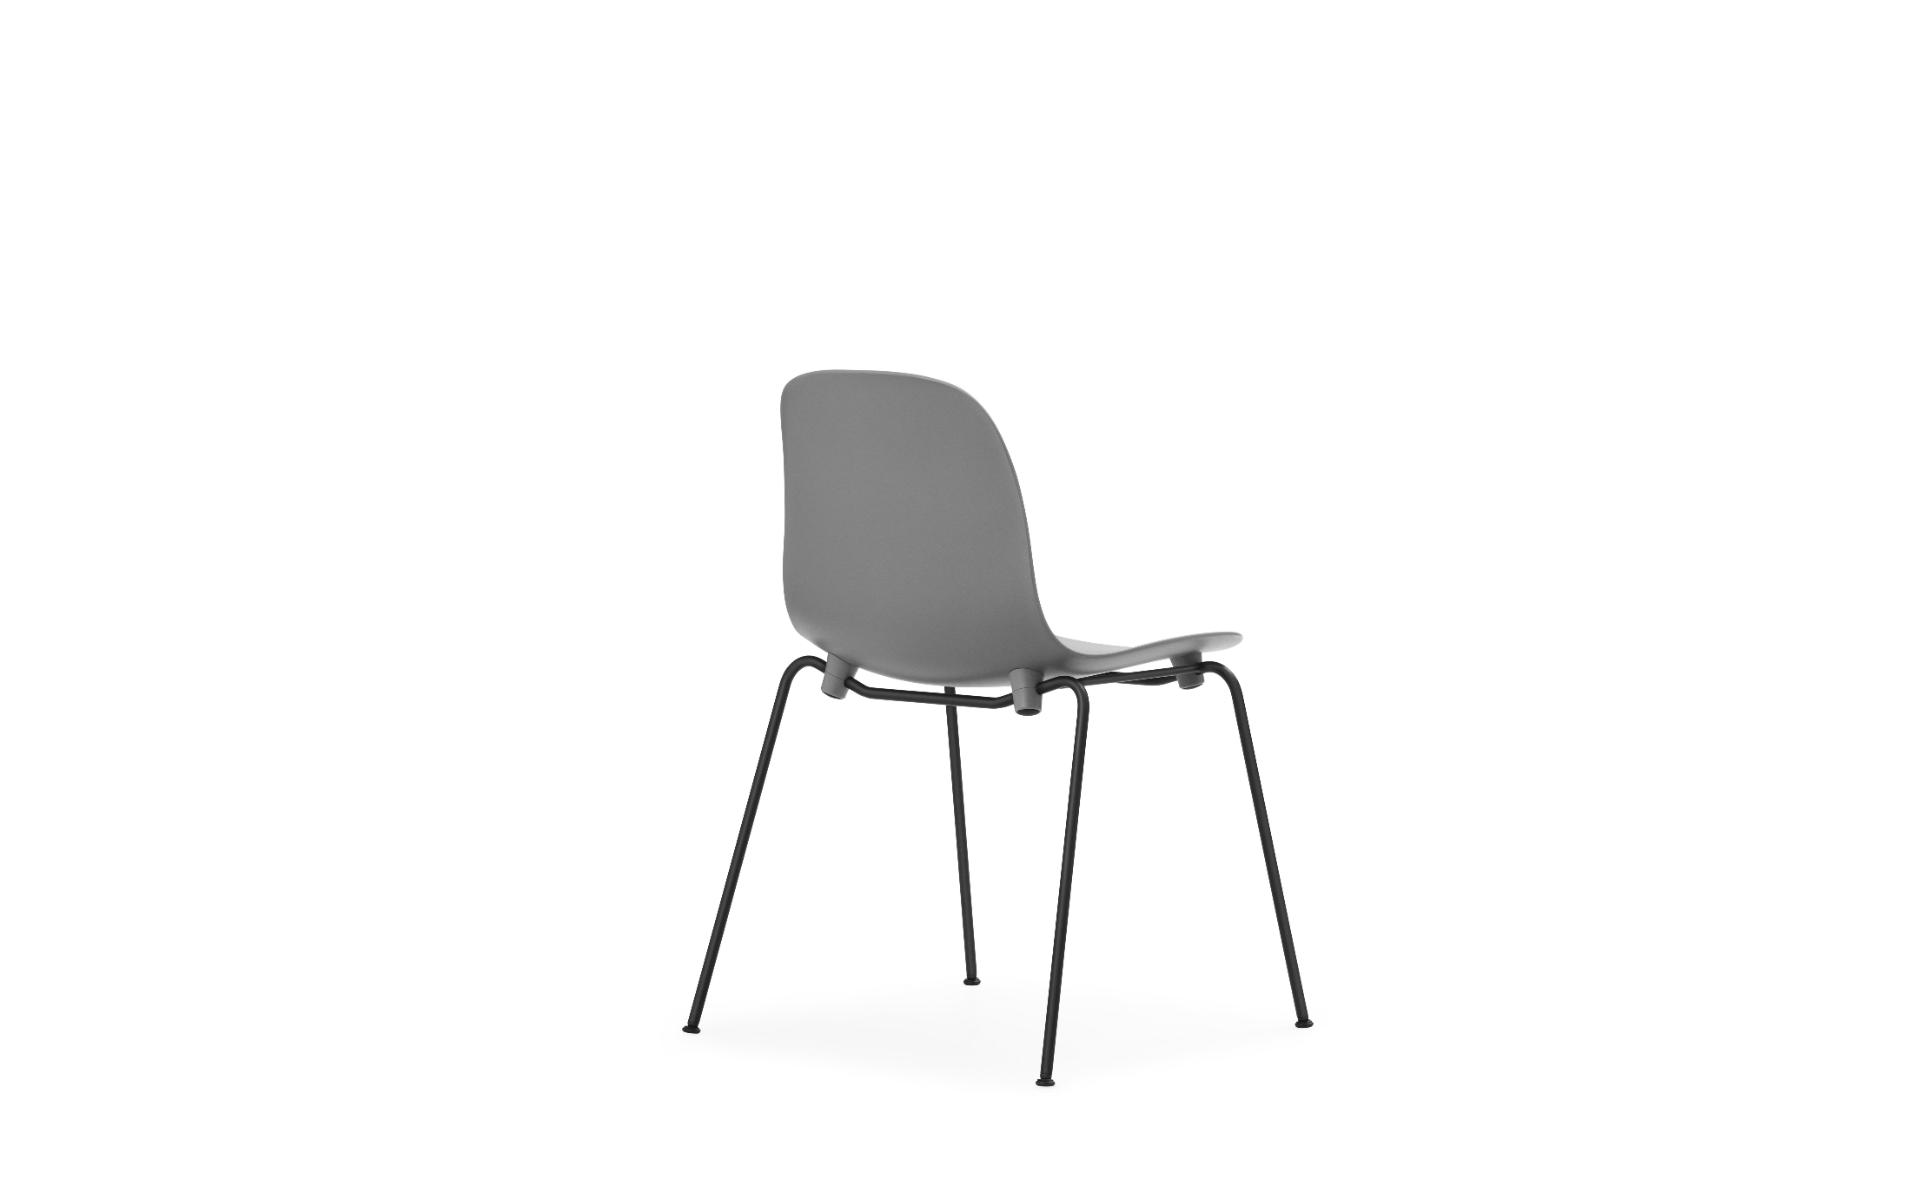 https://www.fundesign.nl/media/catalog/product/f/o/form_chair_stacking_black_steel4_3_.png